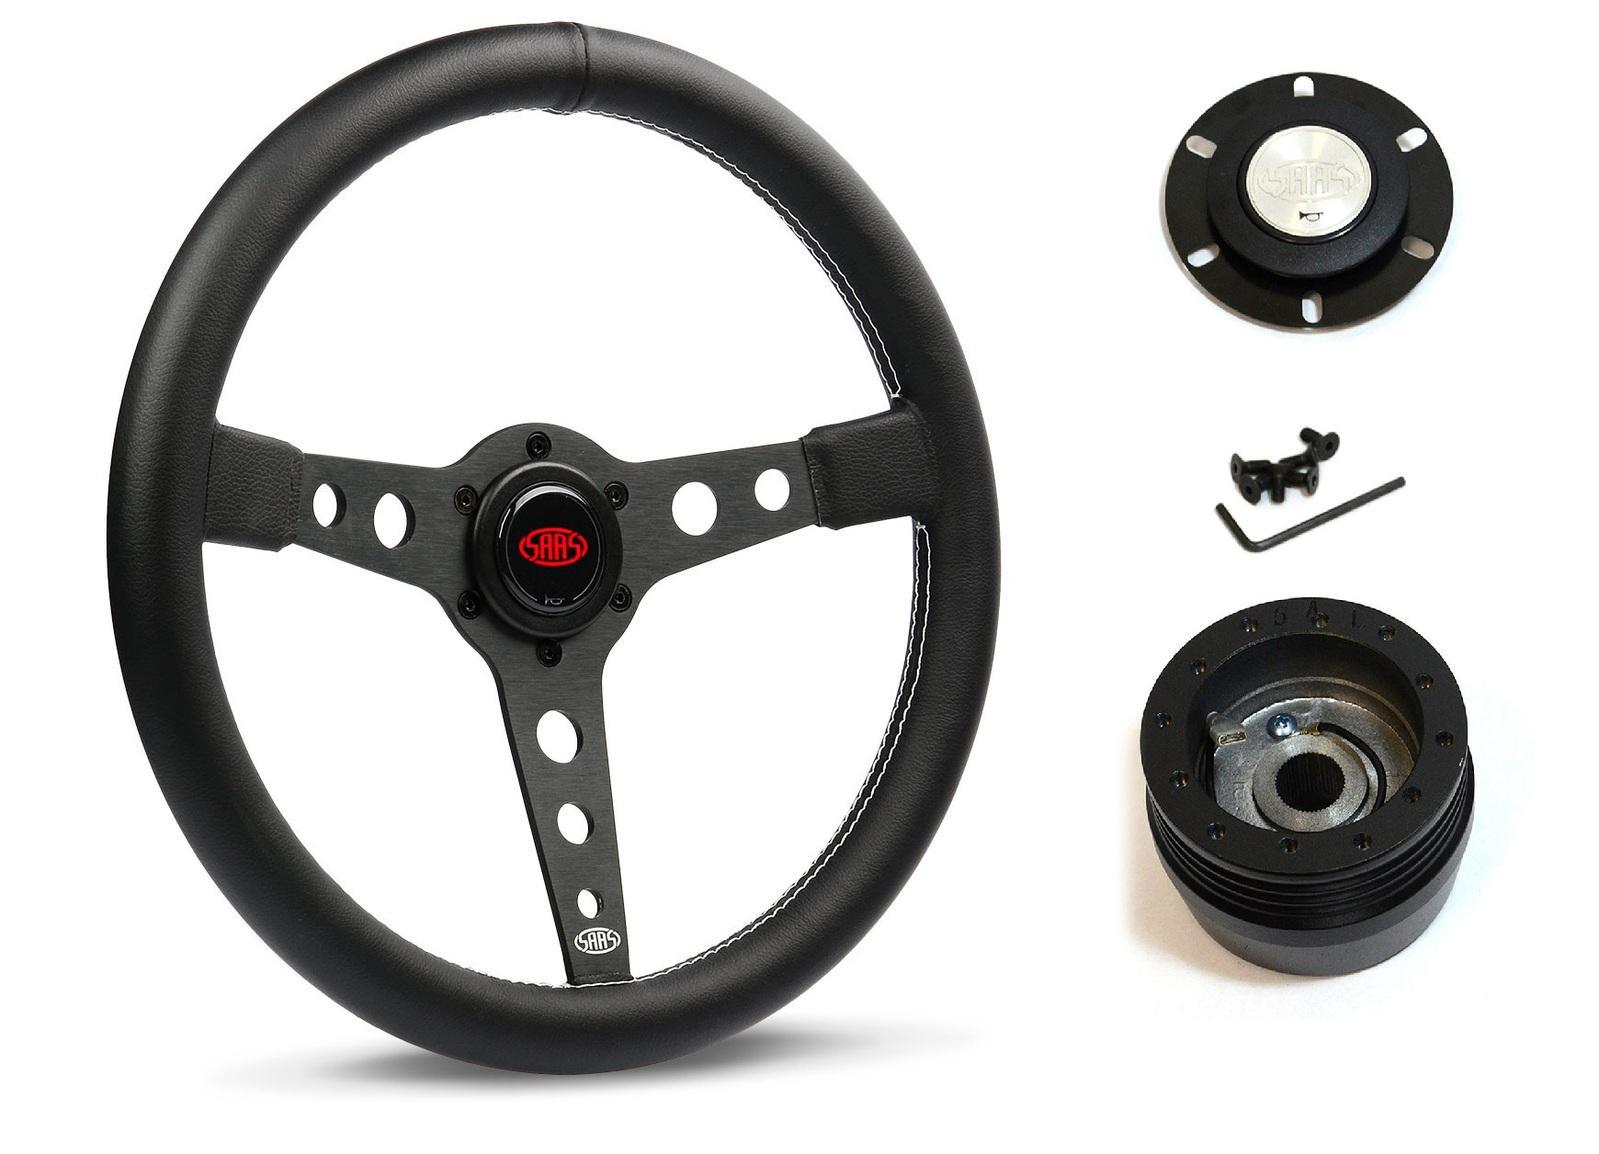 SAAS Steering Wheel Leatherette 14" ADR Retro Black Spoke White Stitching SW616OS-WS and SAAS boss kit for Datsun 120Y 1973-1979